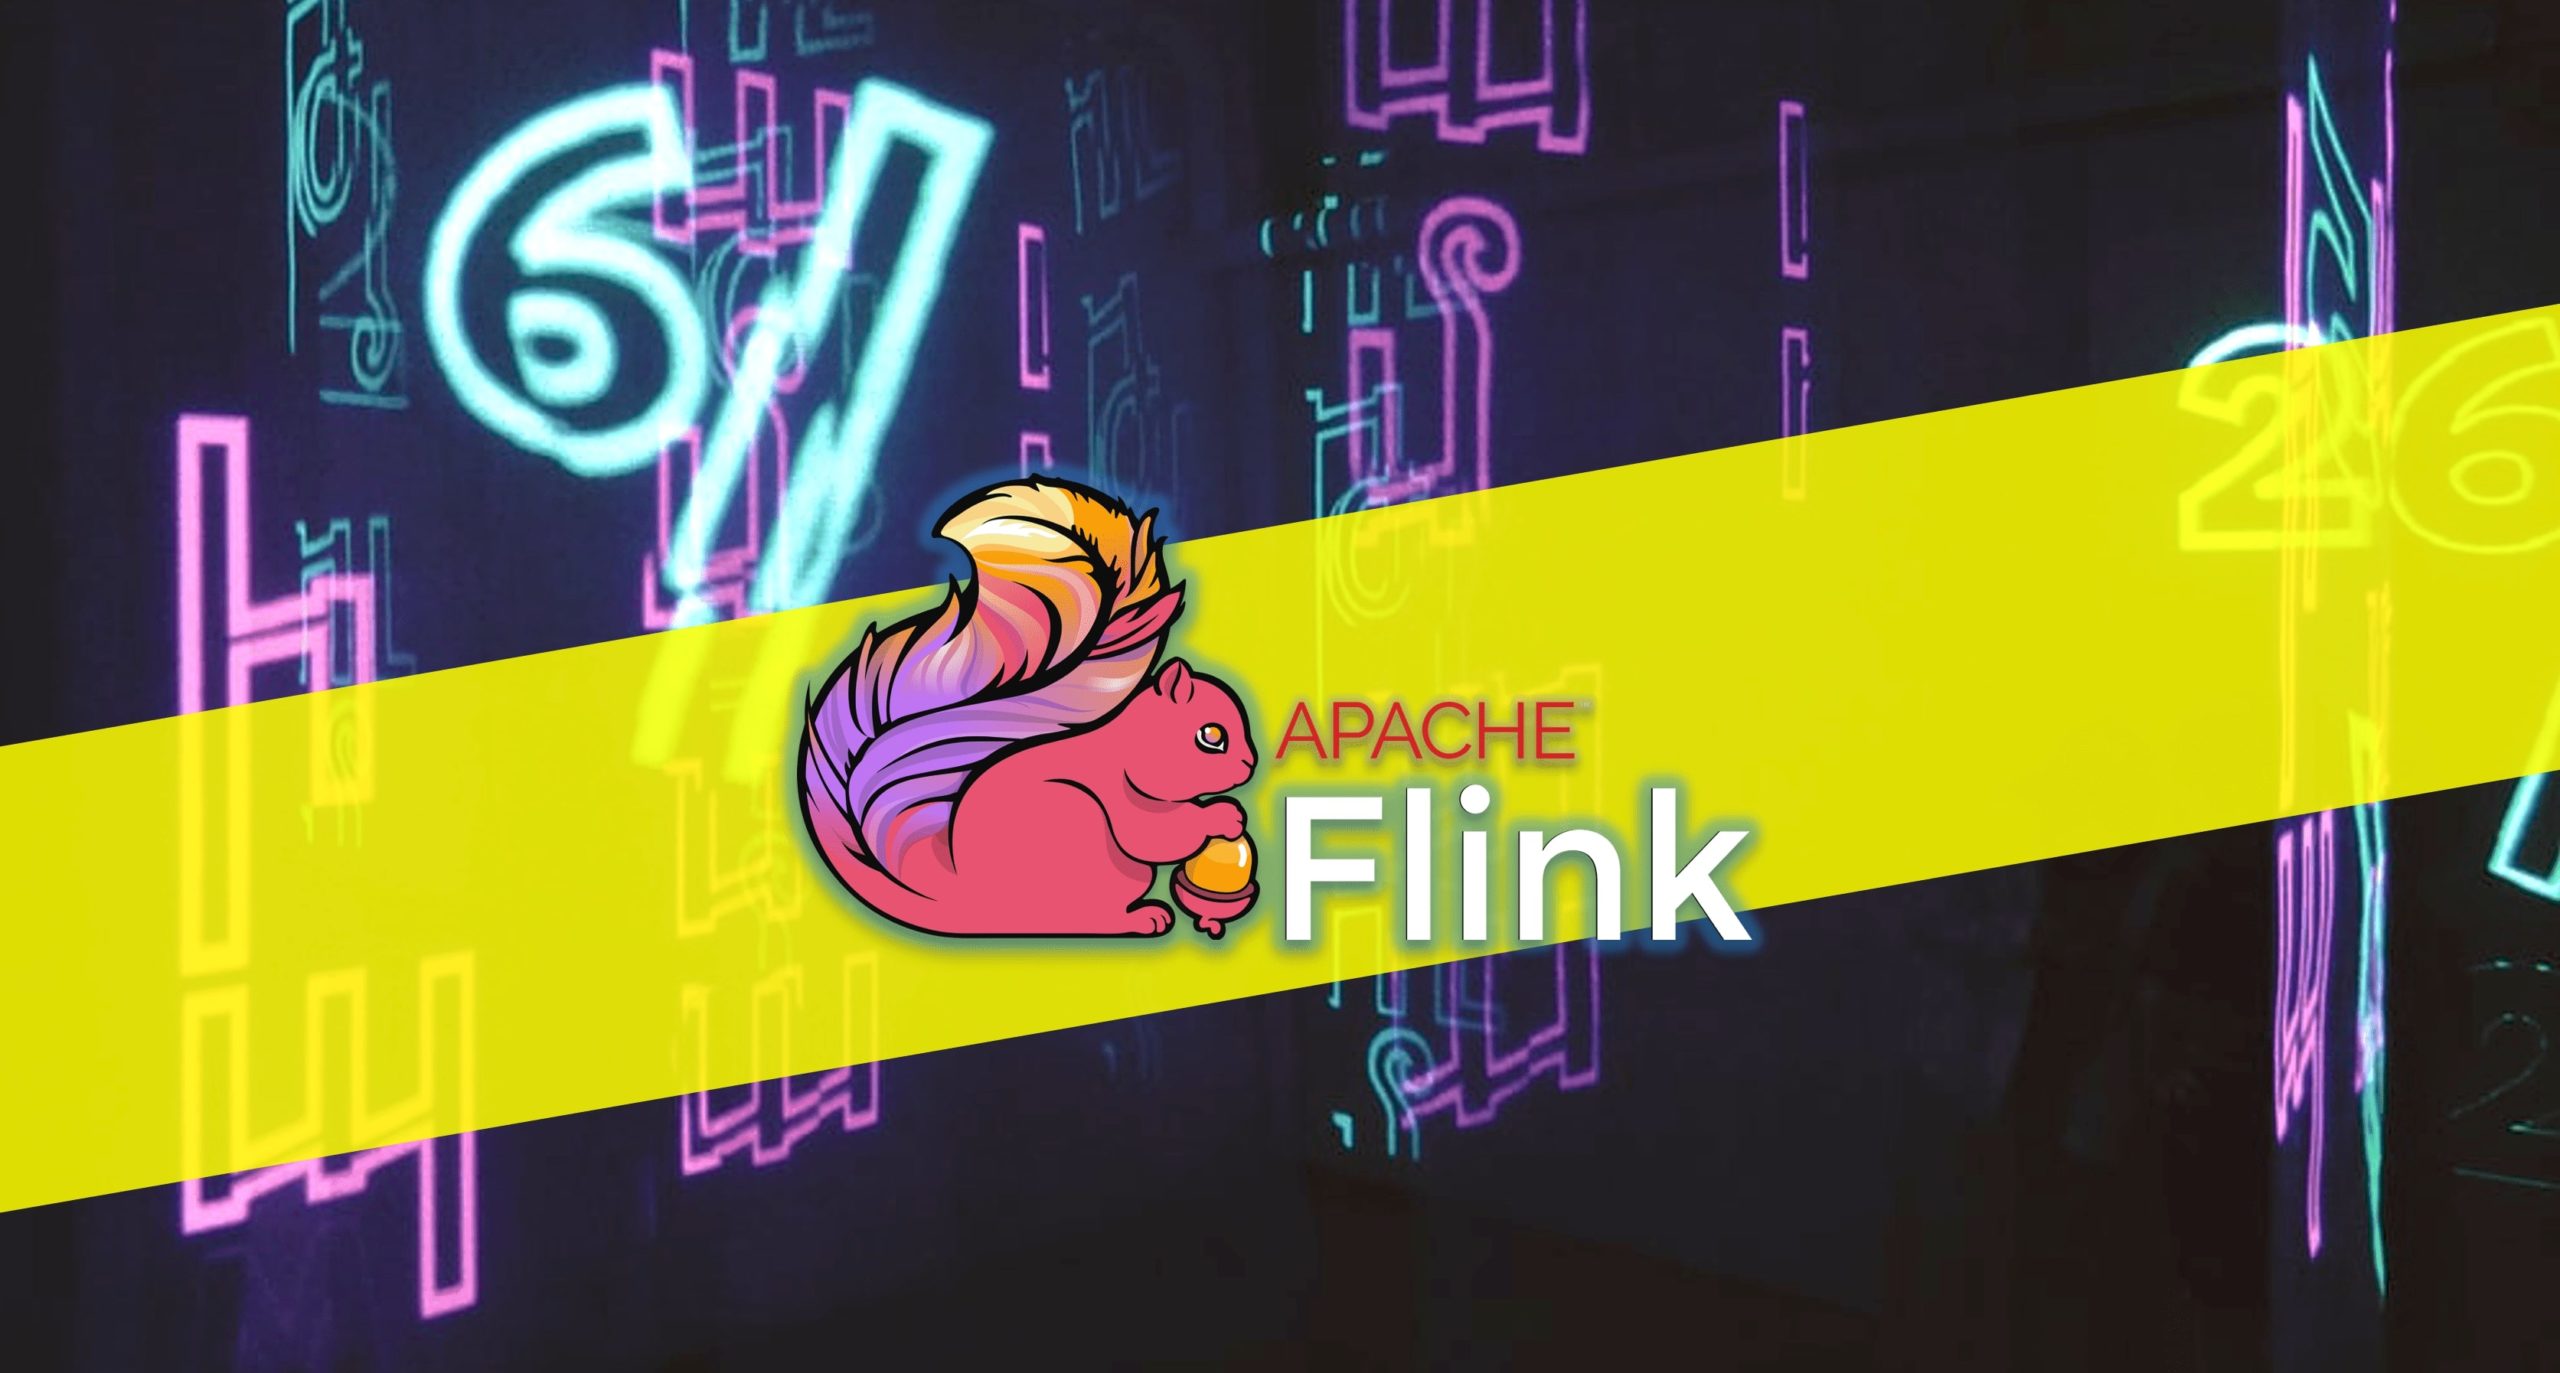 PoC exploits for Apache Flink Path Traversal vulnerabilities posted